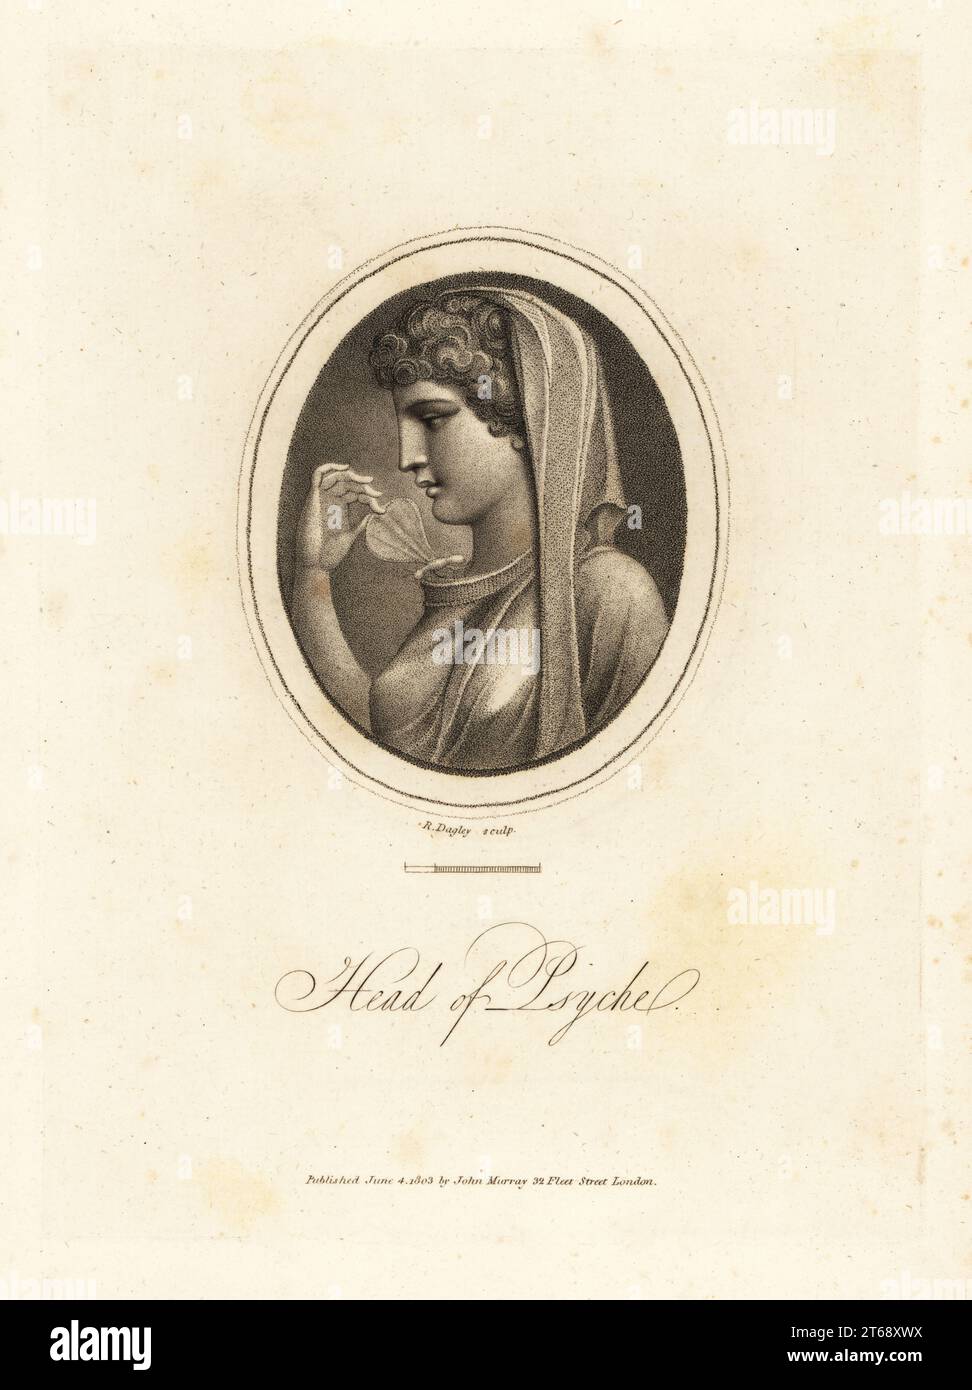 Head of Psyche, Greek goddess of the soul, holding a butterfly on her throat. From a cast engraved on cornelian in Tassie's collection. Copperplate engraving drawn and engraved by Richard Dagley from Gems, Selected from the Antique, with Illustrations, John Murray, London, 1804. Stock Photo